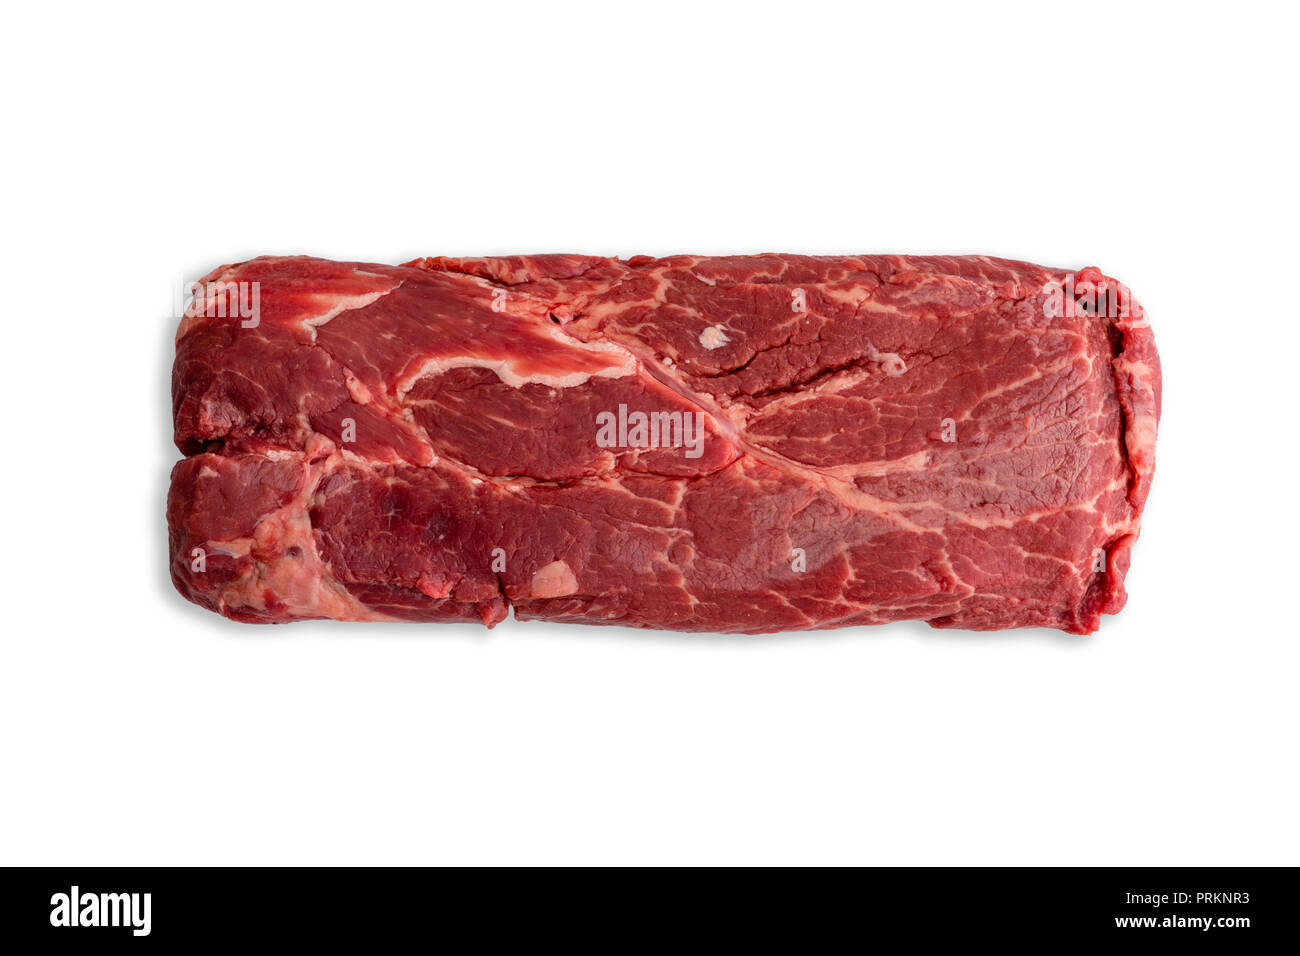 Single uncooked slab of marbled red meat centered over completely white background. Includes copy space. Stock Photo